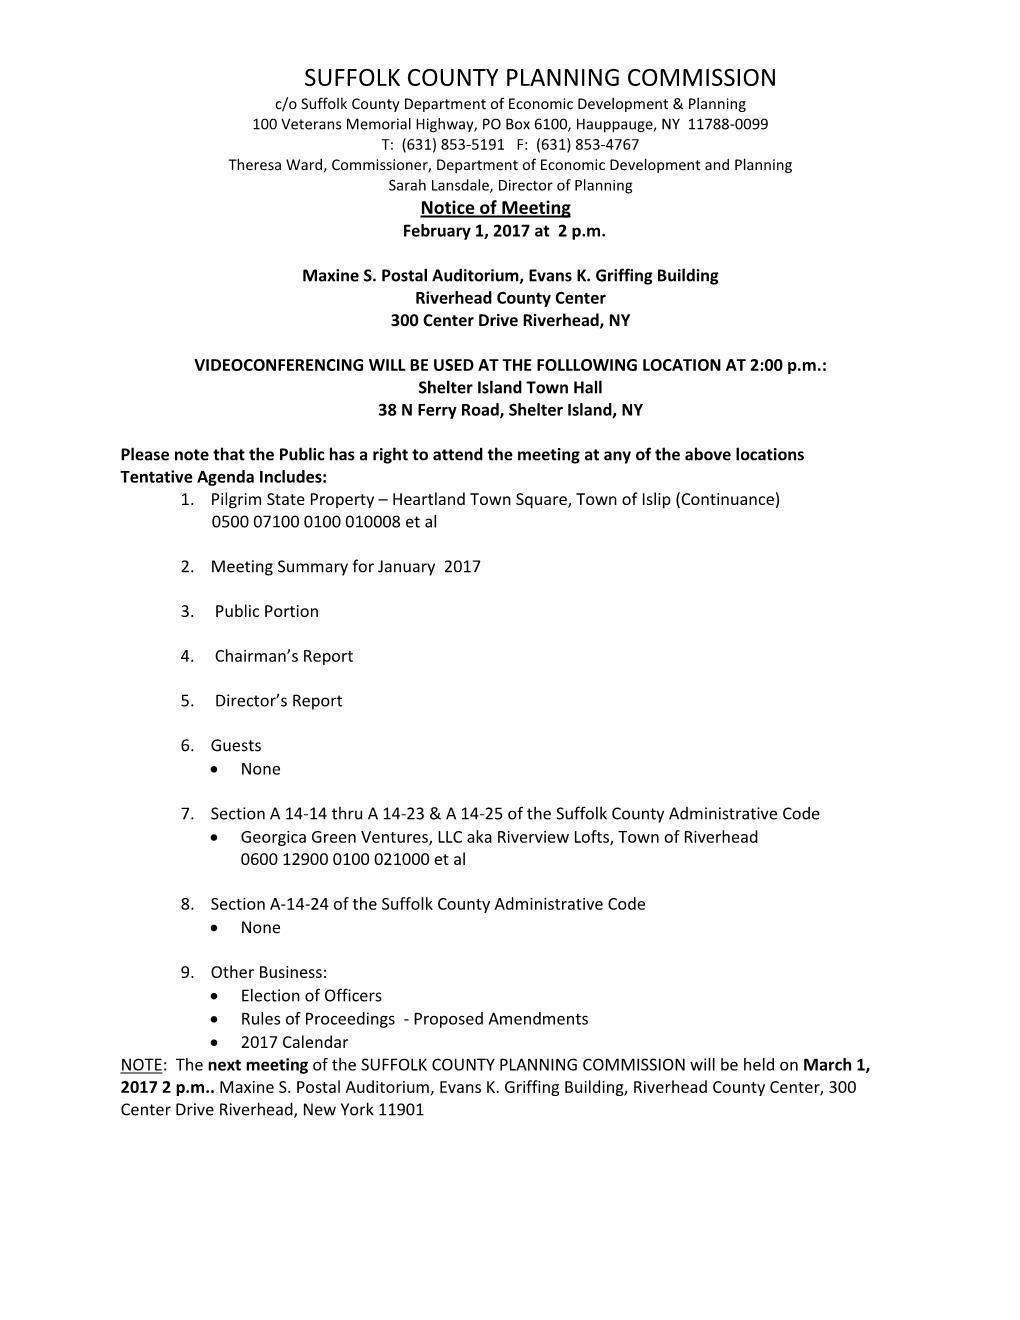 Notice of Meeting February 1, 2017 at 2 P.M